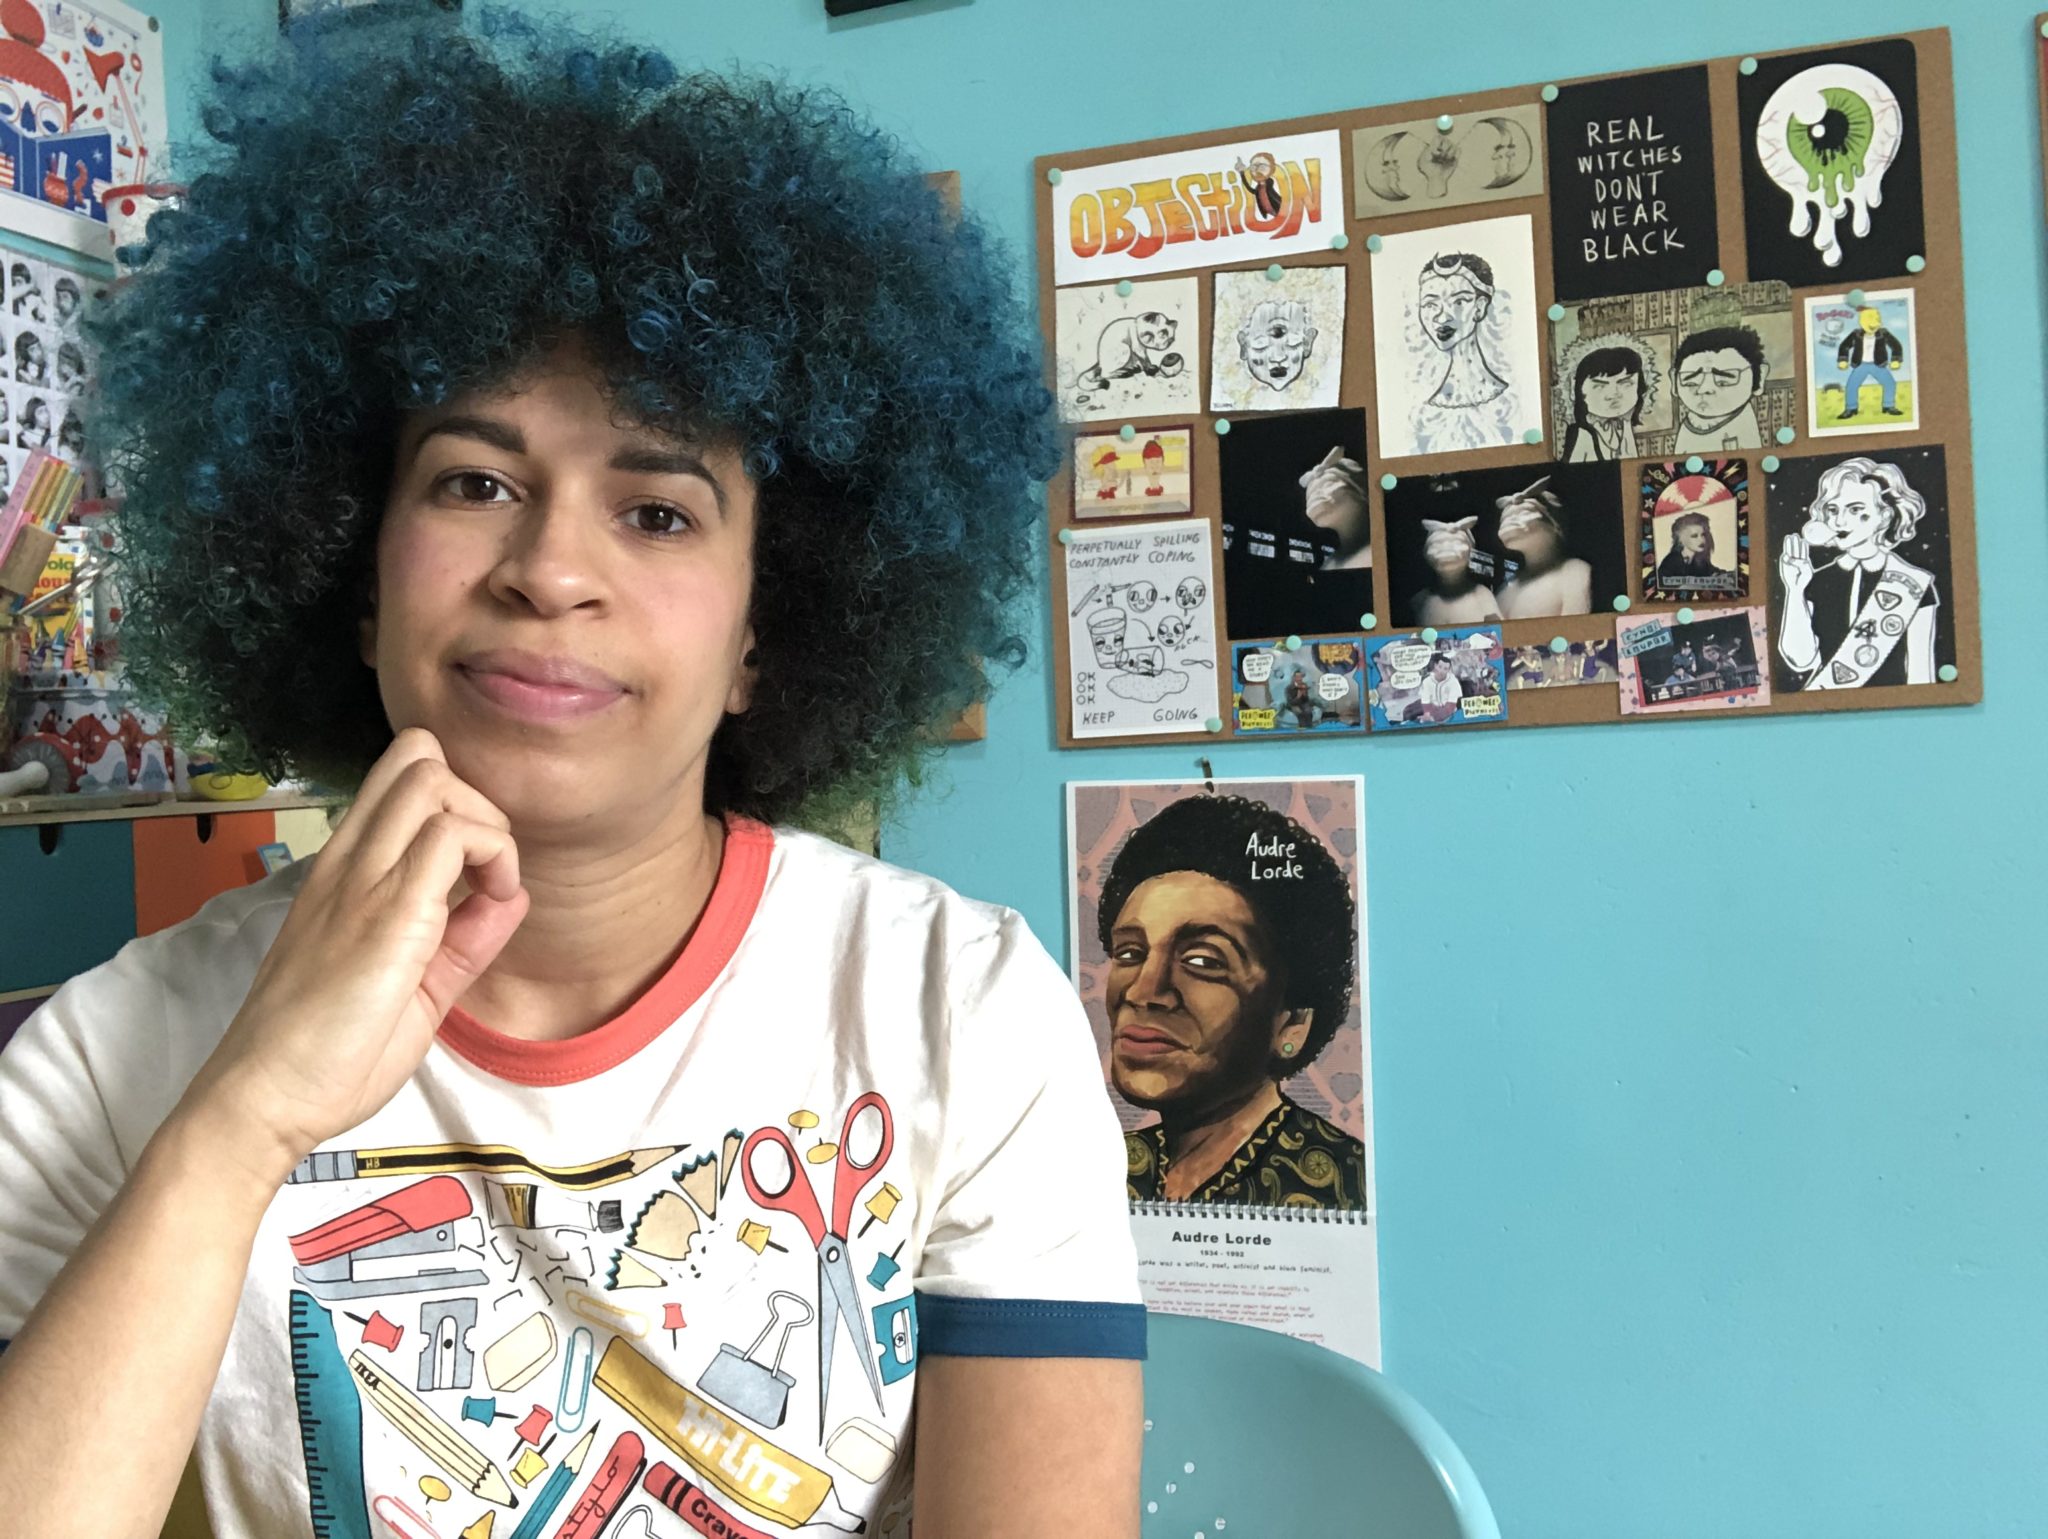 A Black woman with a turquoise afro sits at a desk with her hand under her chin. She is wearing a white T shirt with craft equipment illustrations on it. Behind her is a turquoise painted wall with a picture covered noticeboard on it